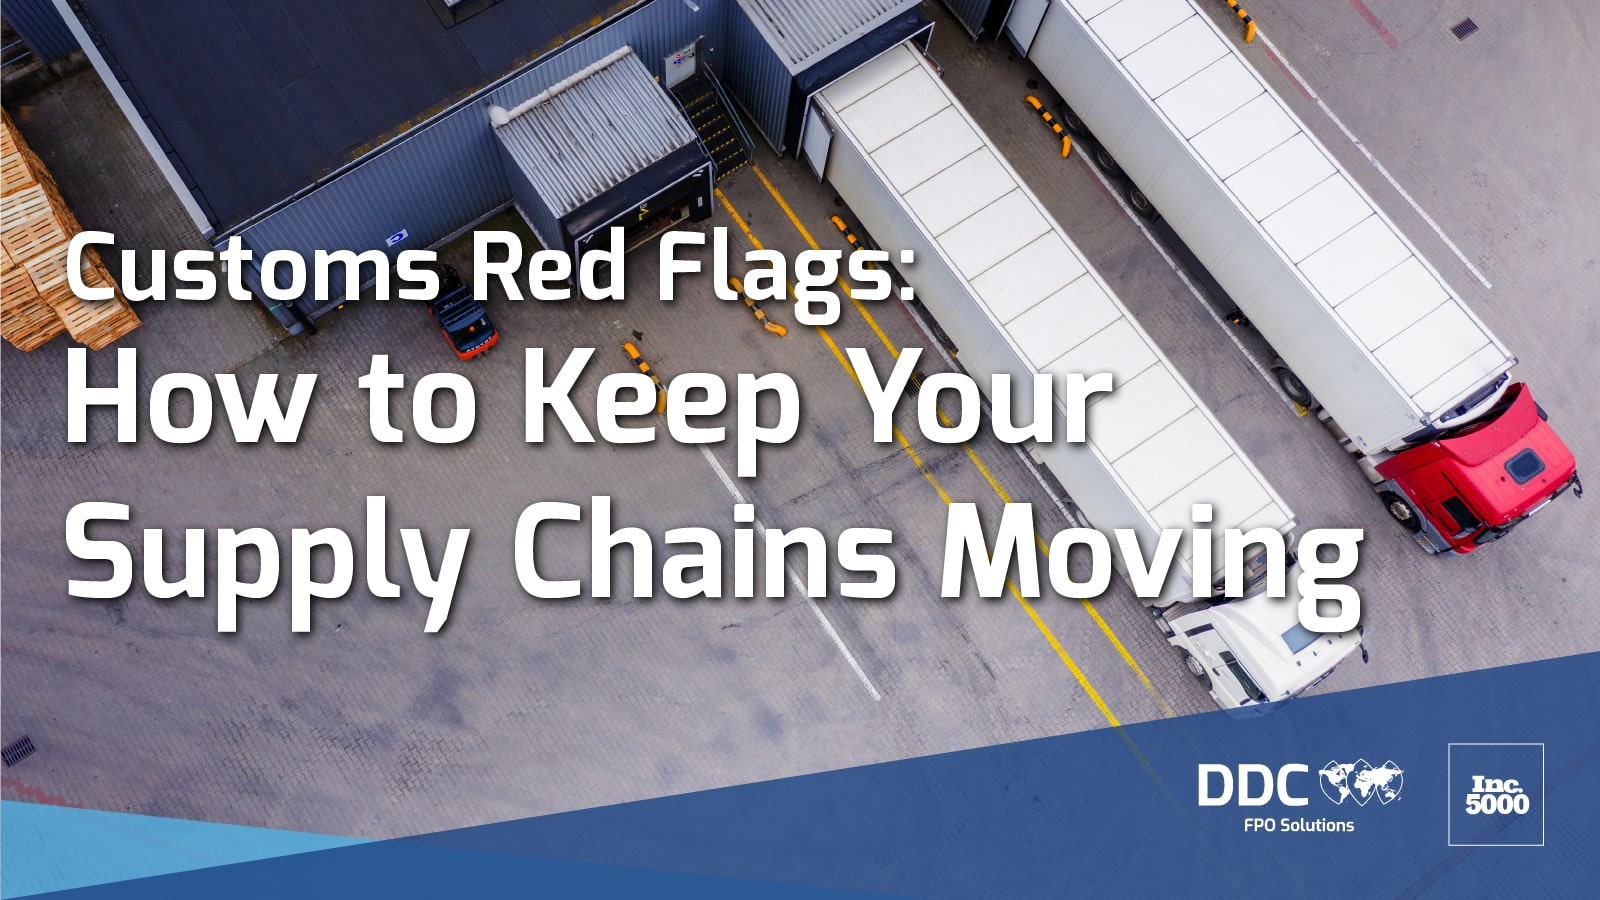 Customs Red Flags: How to Keep Your Supply Chains Moving